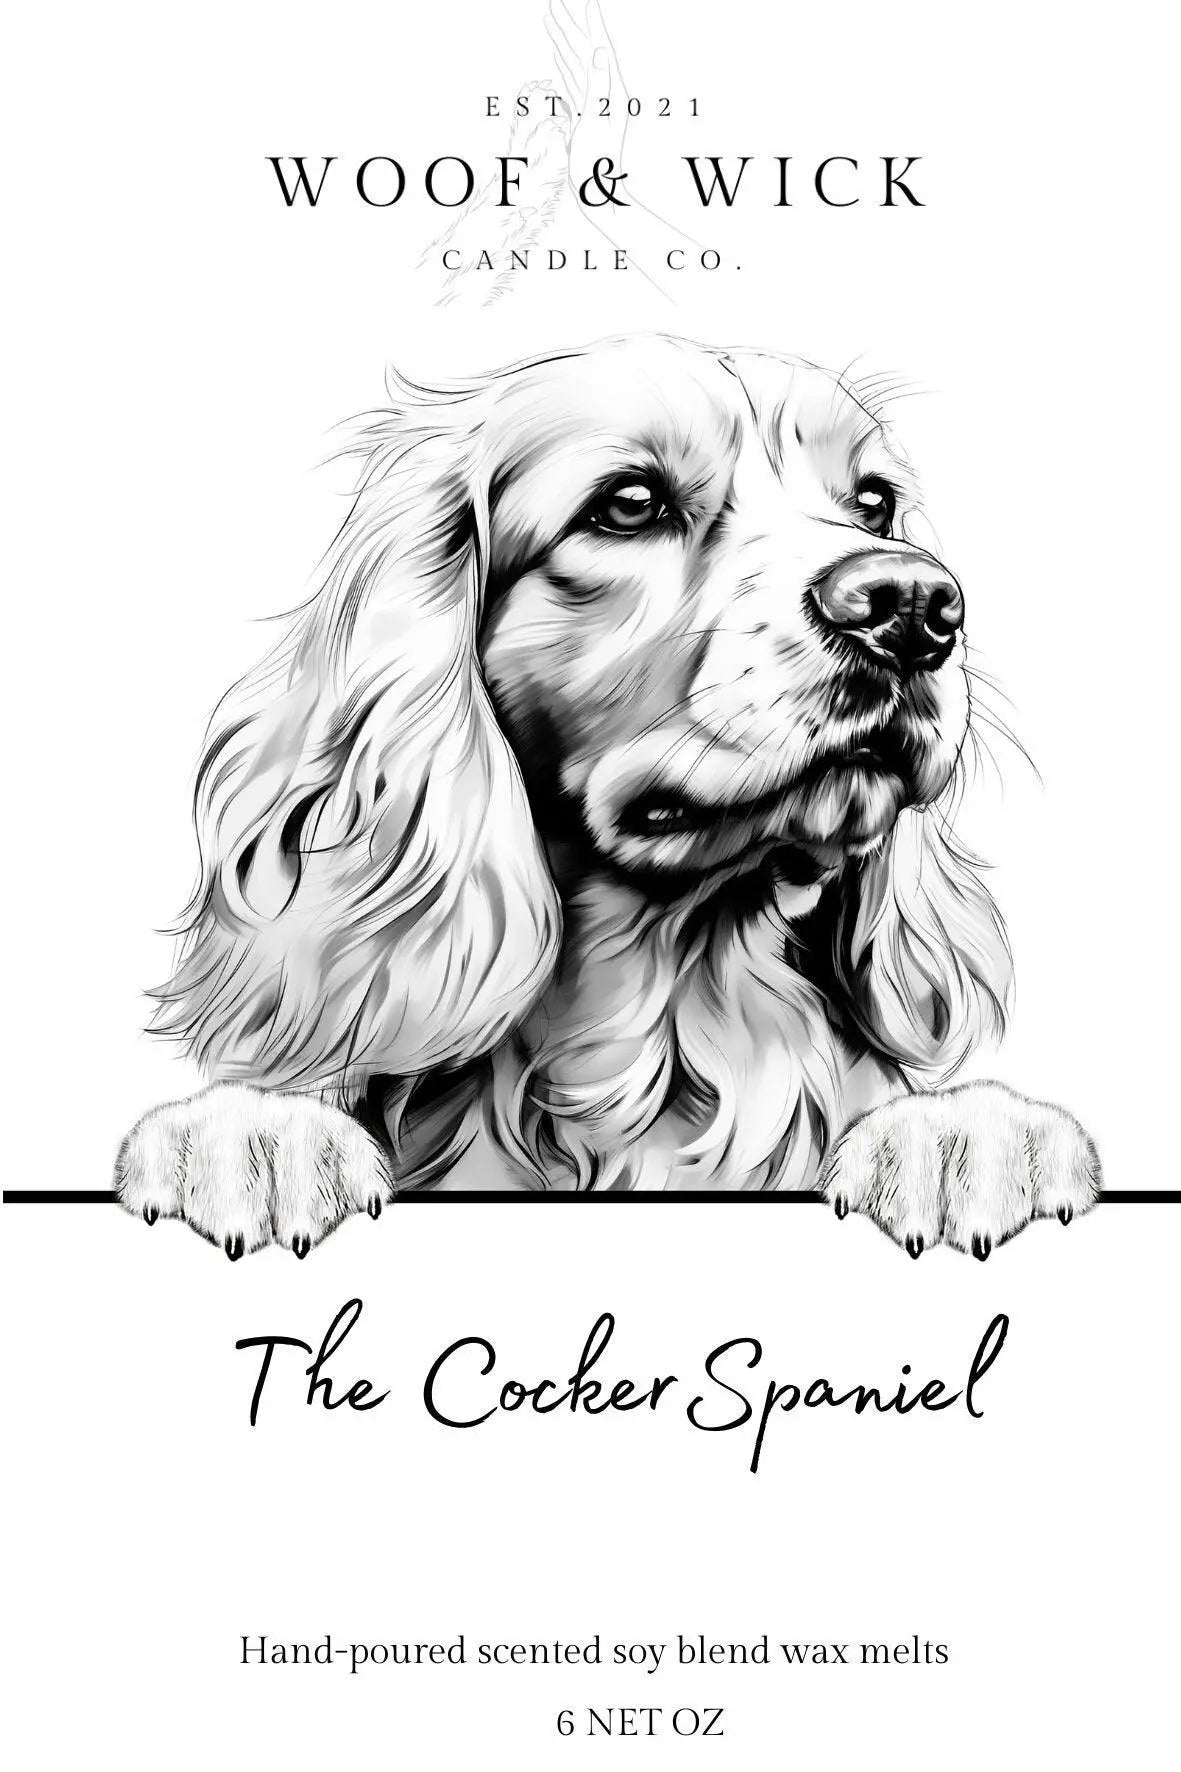 The Cocker Spaniel - STRONG SCENTED Personalized Dog Breed Soy Wax Melts | Gift Ideas | Spring Scents | Wax Tarts | spring wax melts | - Woof & Wick Candle Co.